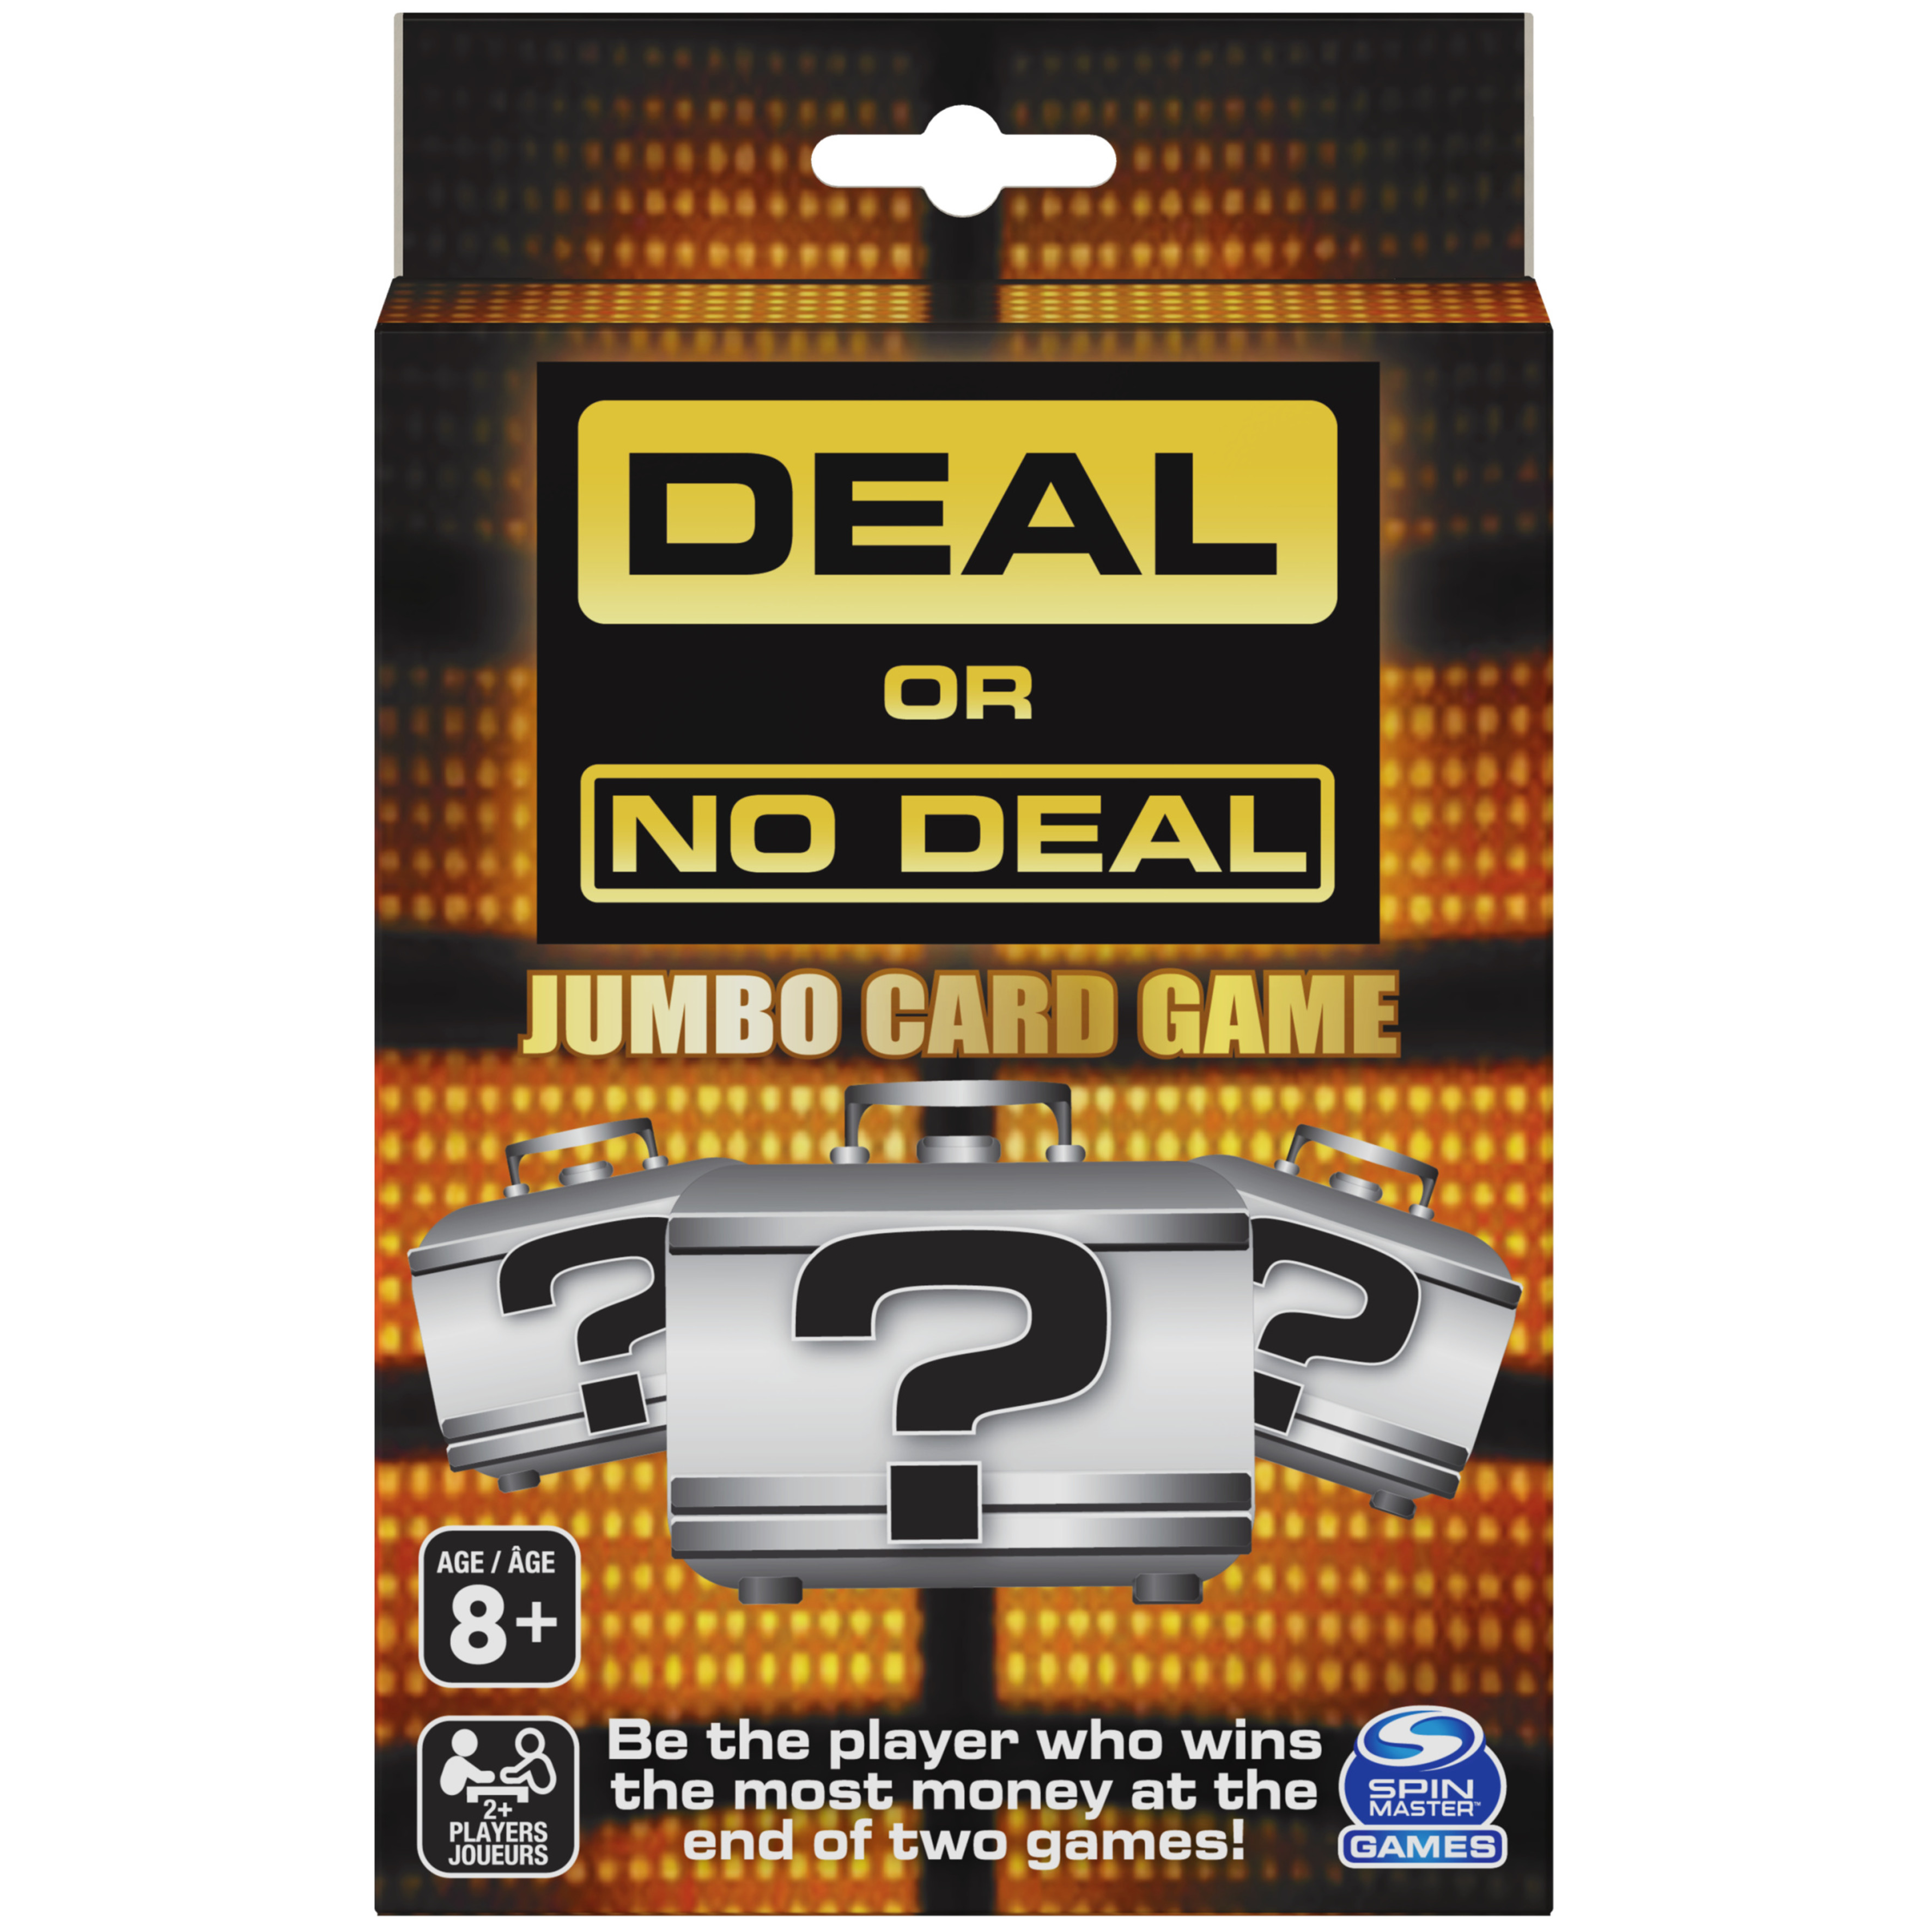 Deal or No Deal Game Show, Jumbo Card Game, For Families and Kids Ages 8 and up - image 1 of 7